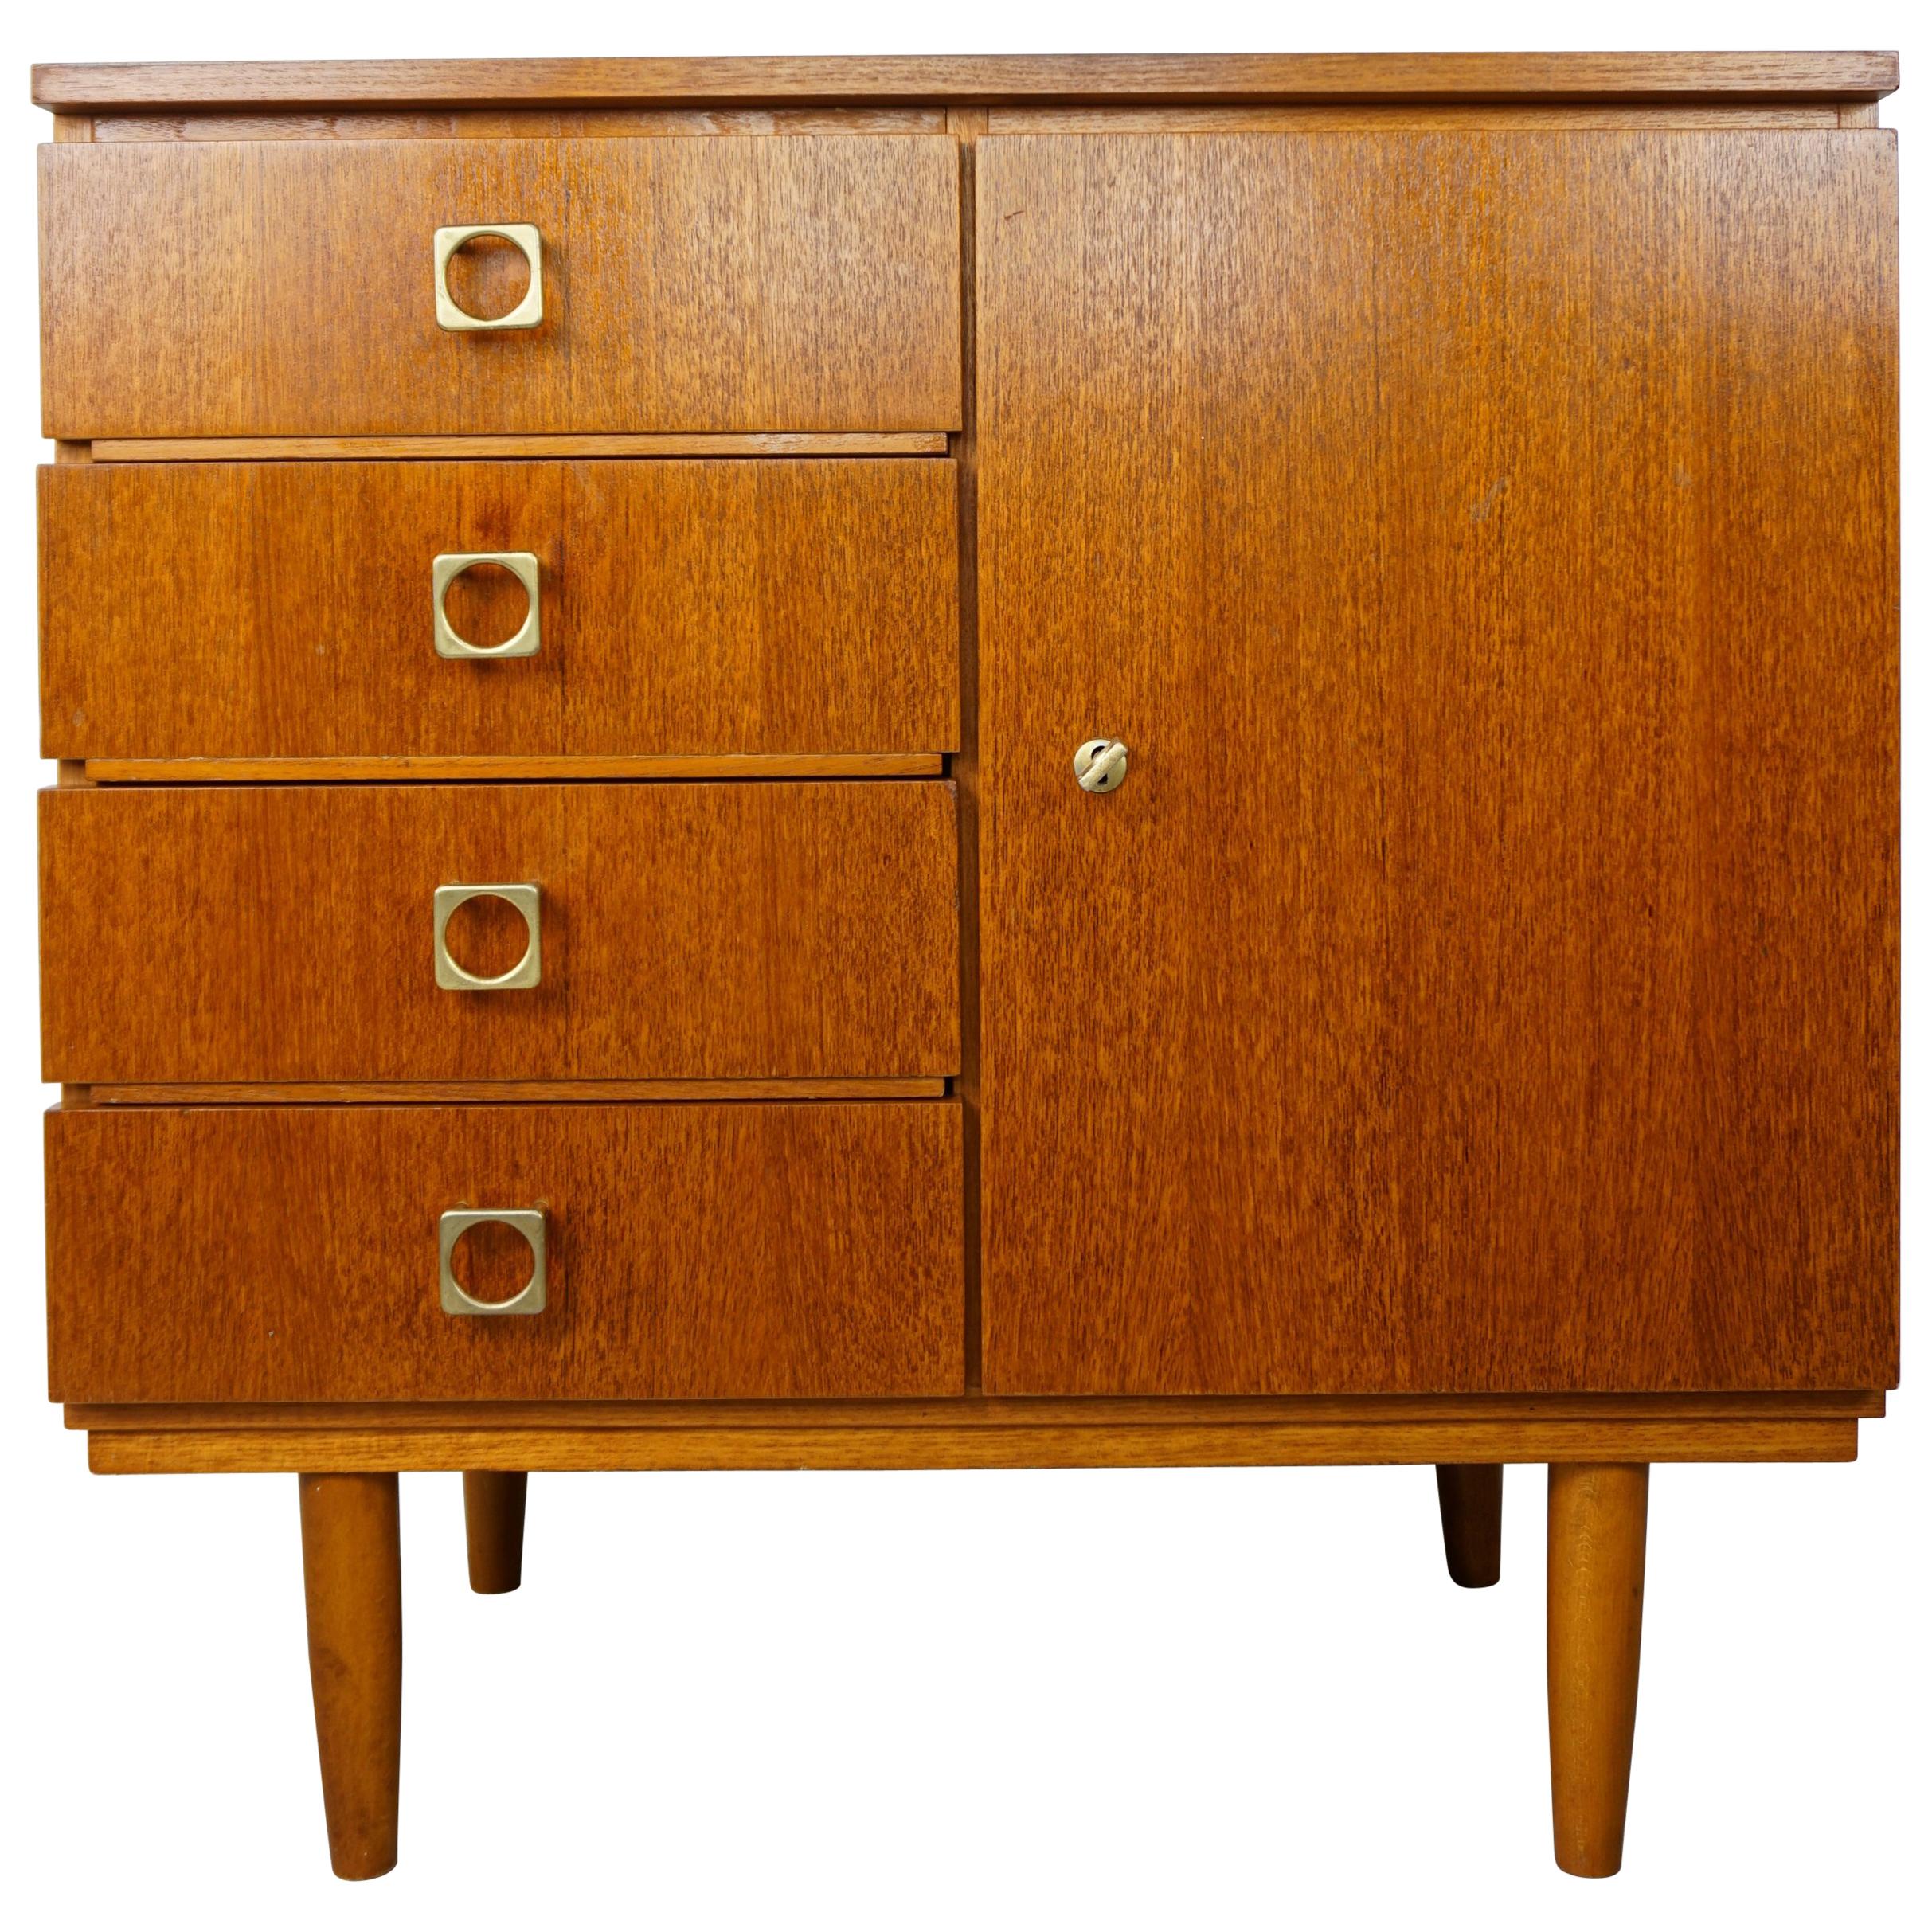 1950s-1960s Wooden Cabinet